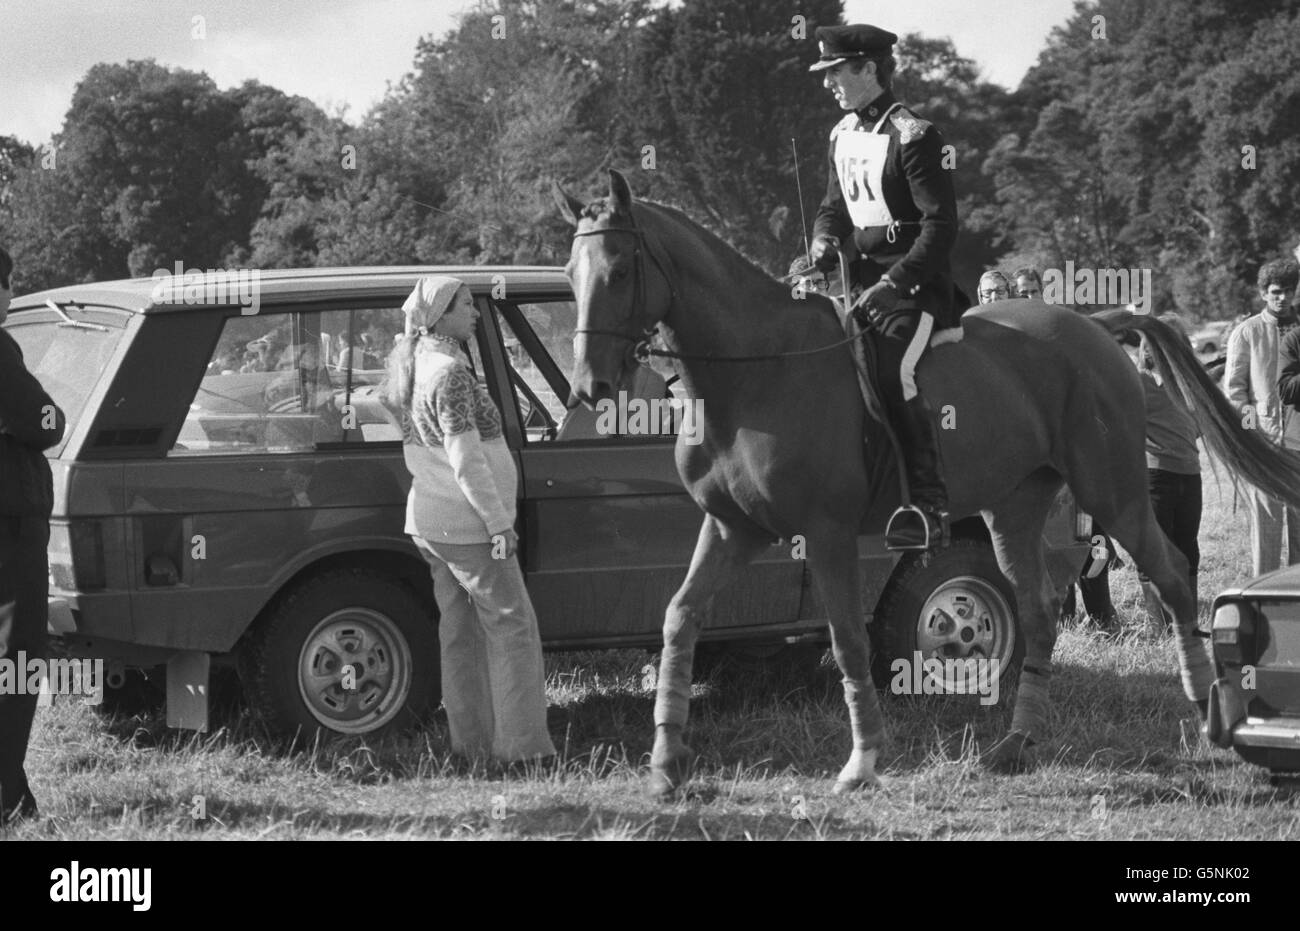 A pregnant Princess Anne at Knowlton Court, Kent, where she was watching husband Mark Phillips compete in the Knowlton Horse Trials. *Low res scan - hi res version available on request* Stock Photo